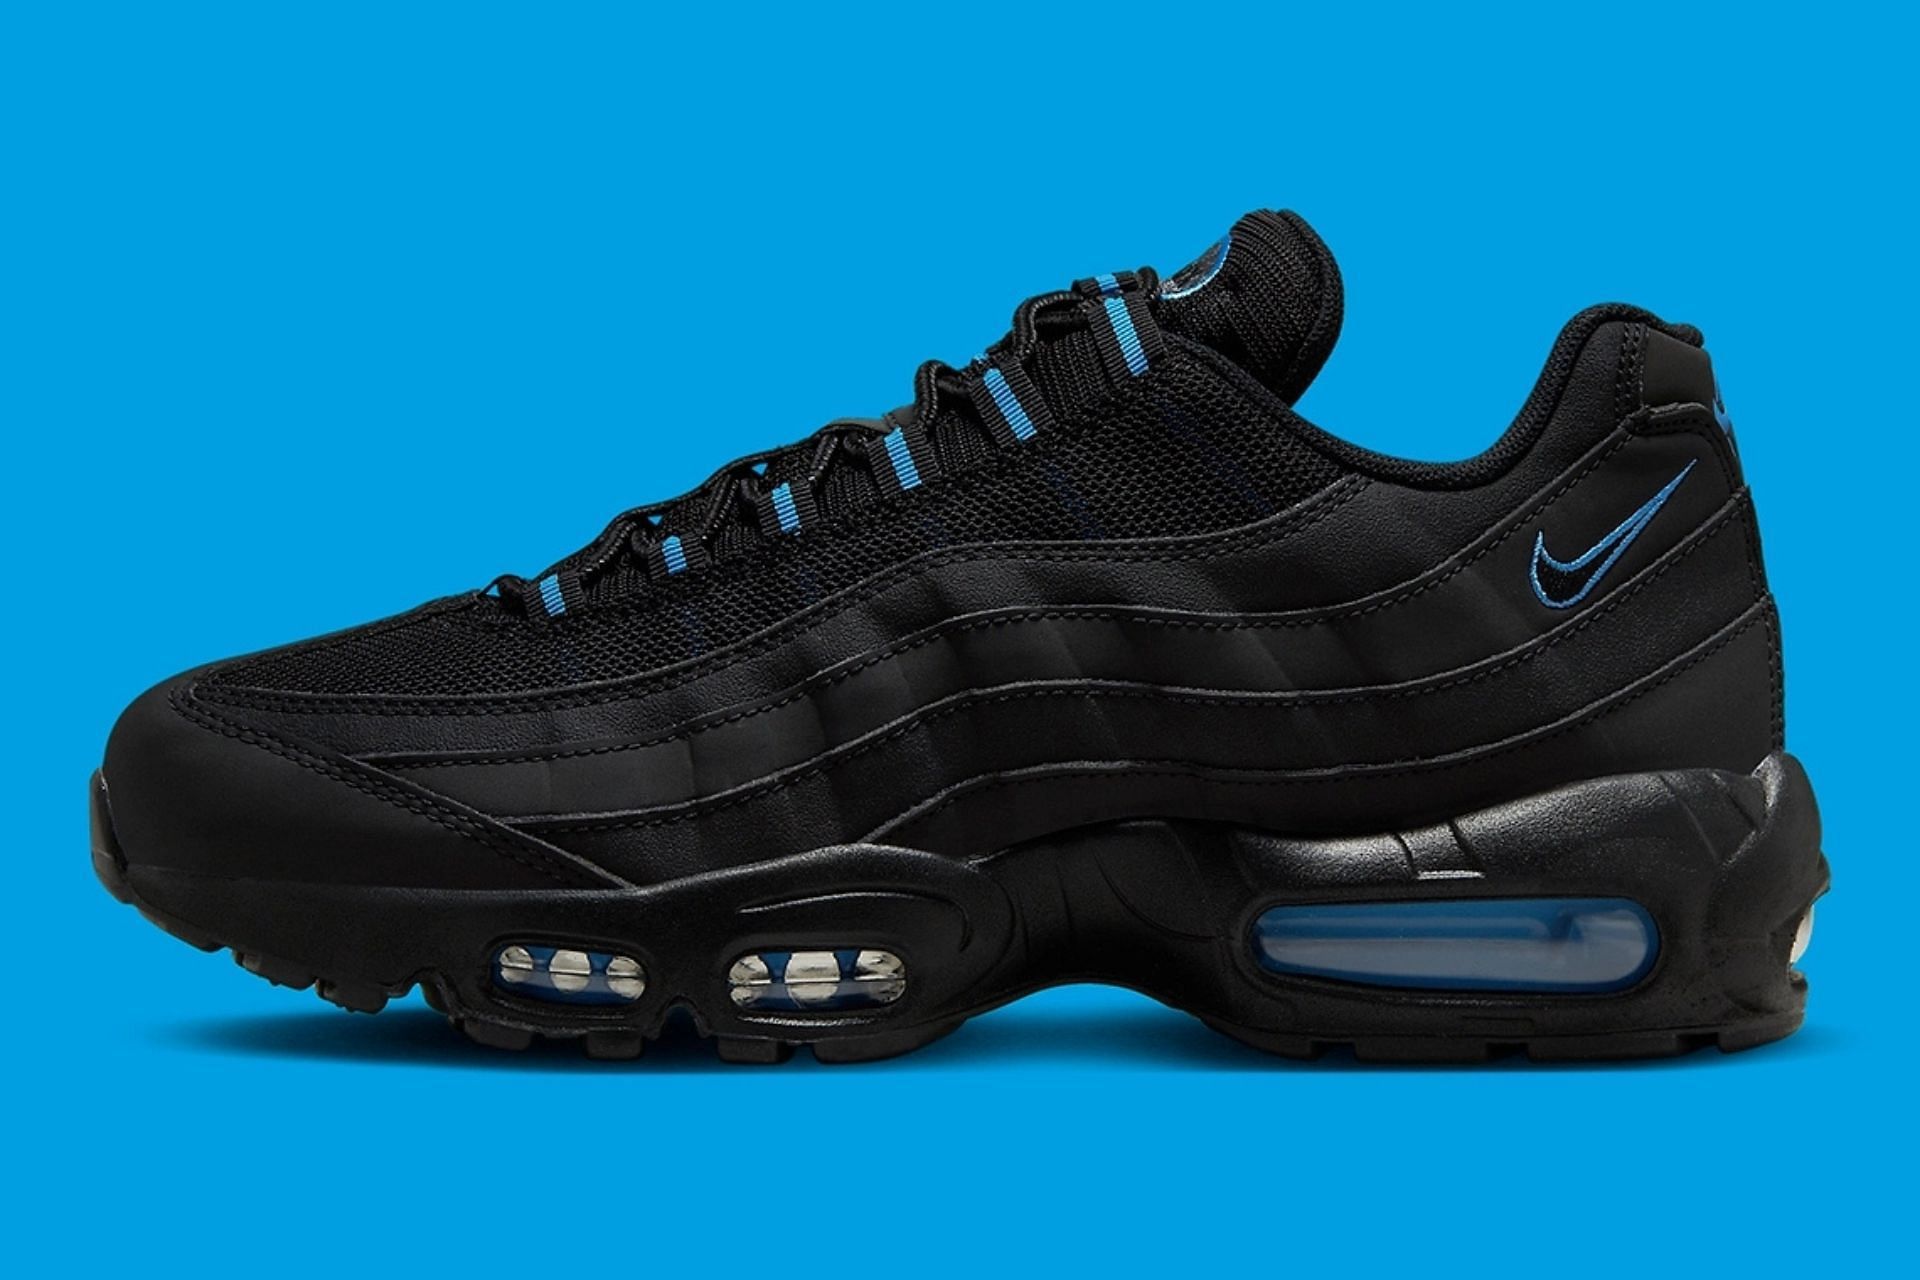 motto bros Meerdere Air Max 1: Nike Air Max 95 "Black/University Blue" shoes: Where to buy,  price, and more details explored